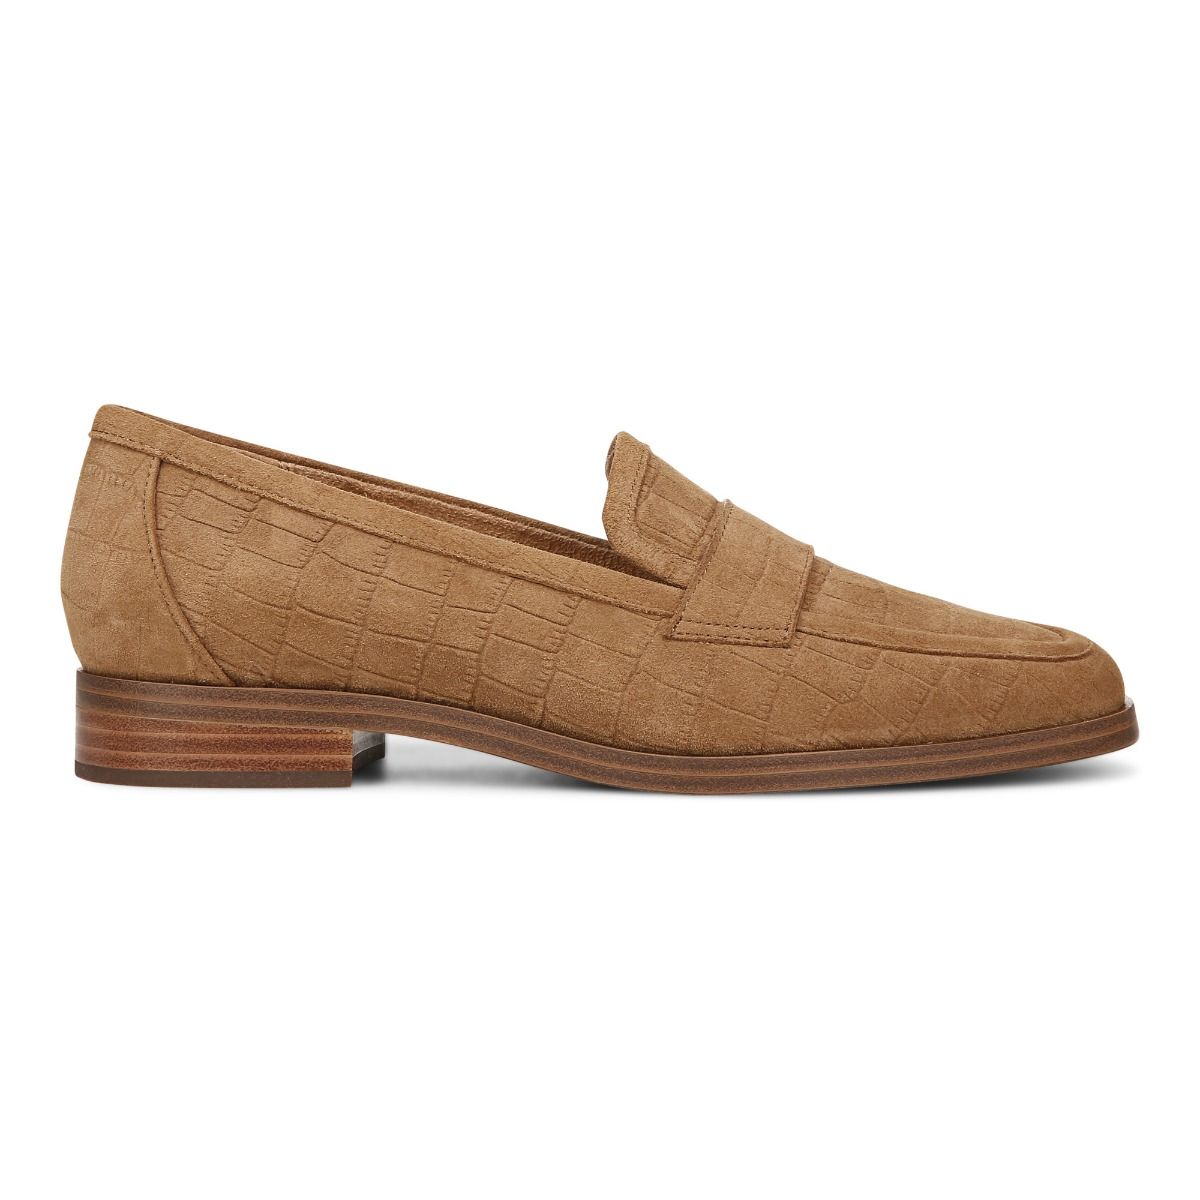 Women's Vionic Sellah Loafer Color: Tan Suede 